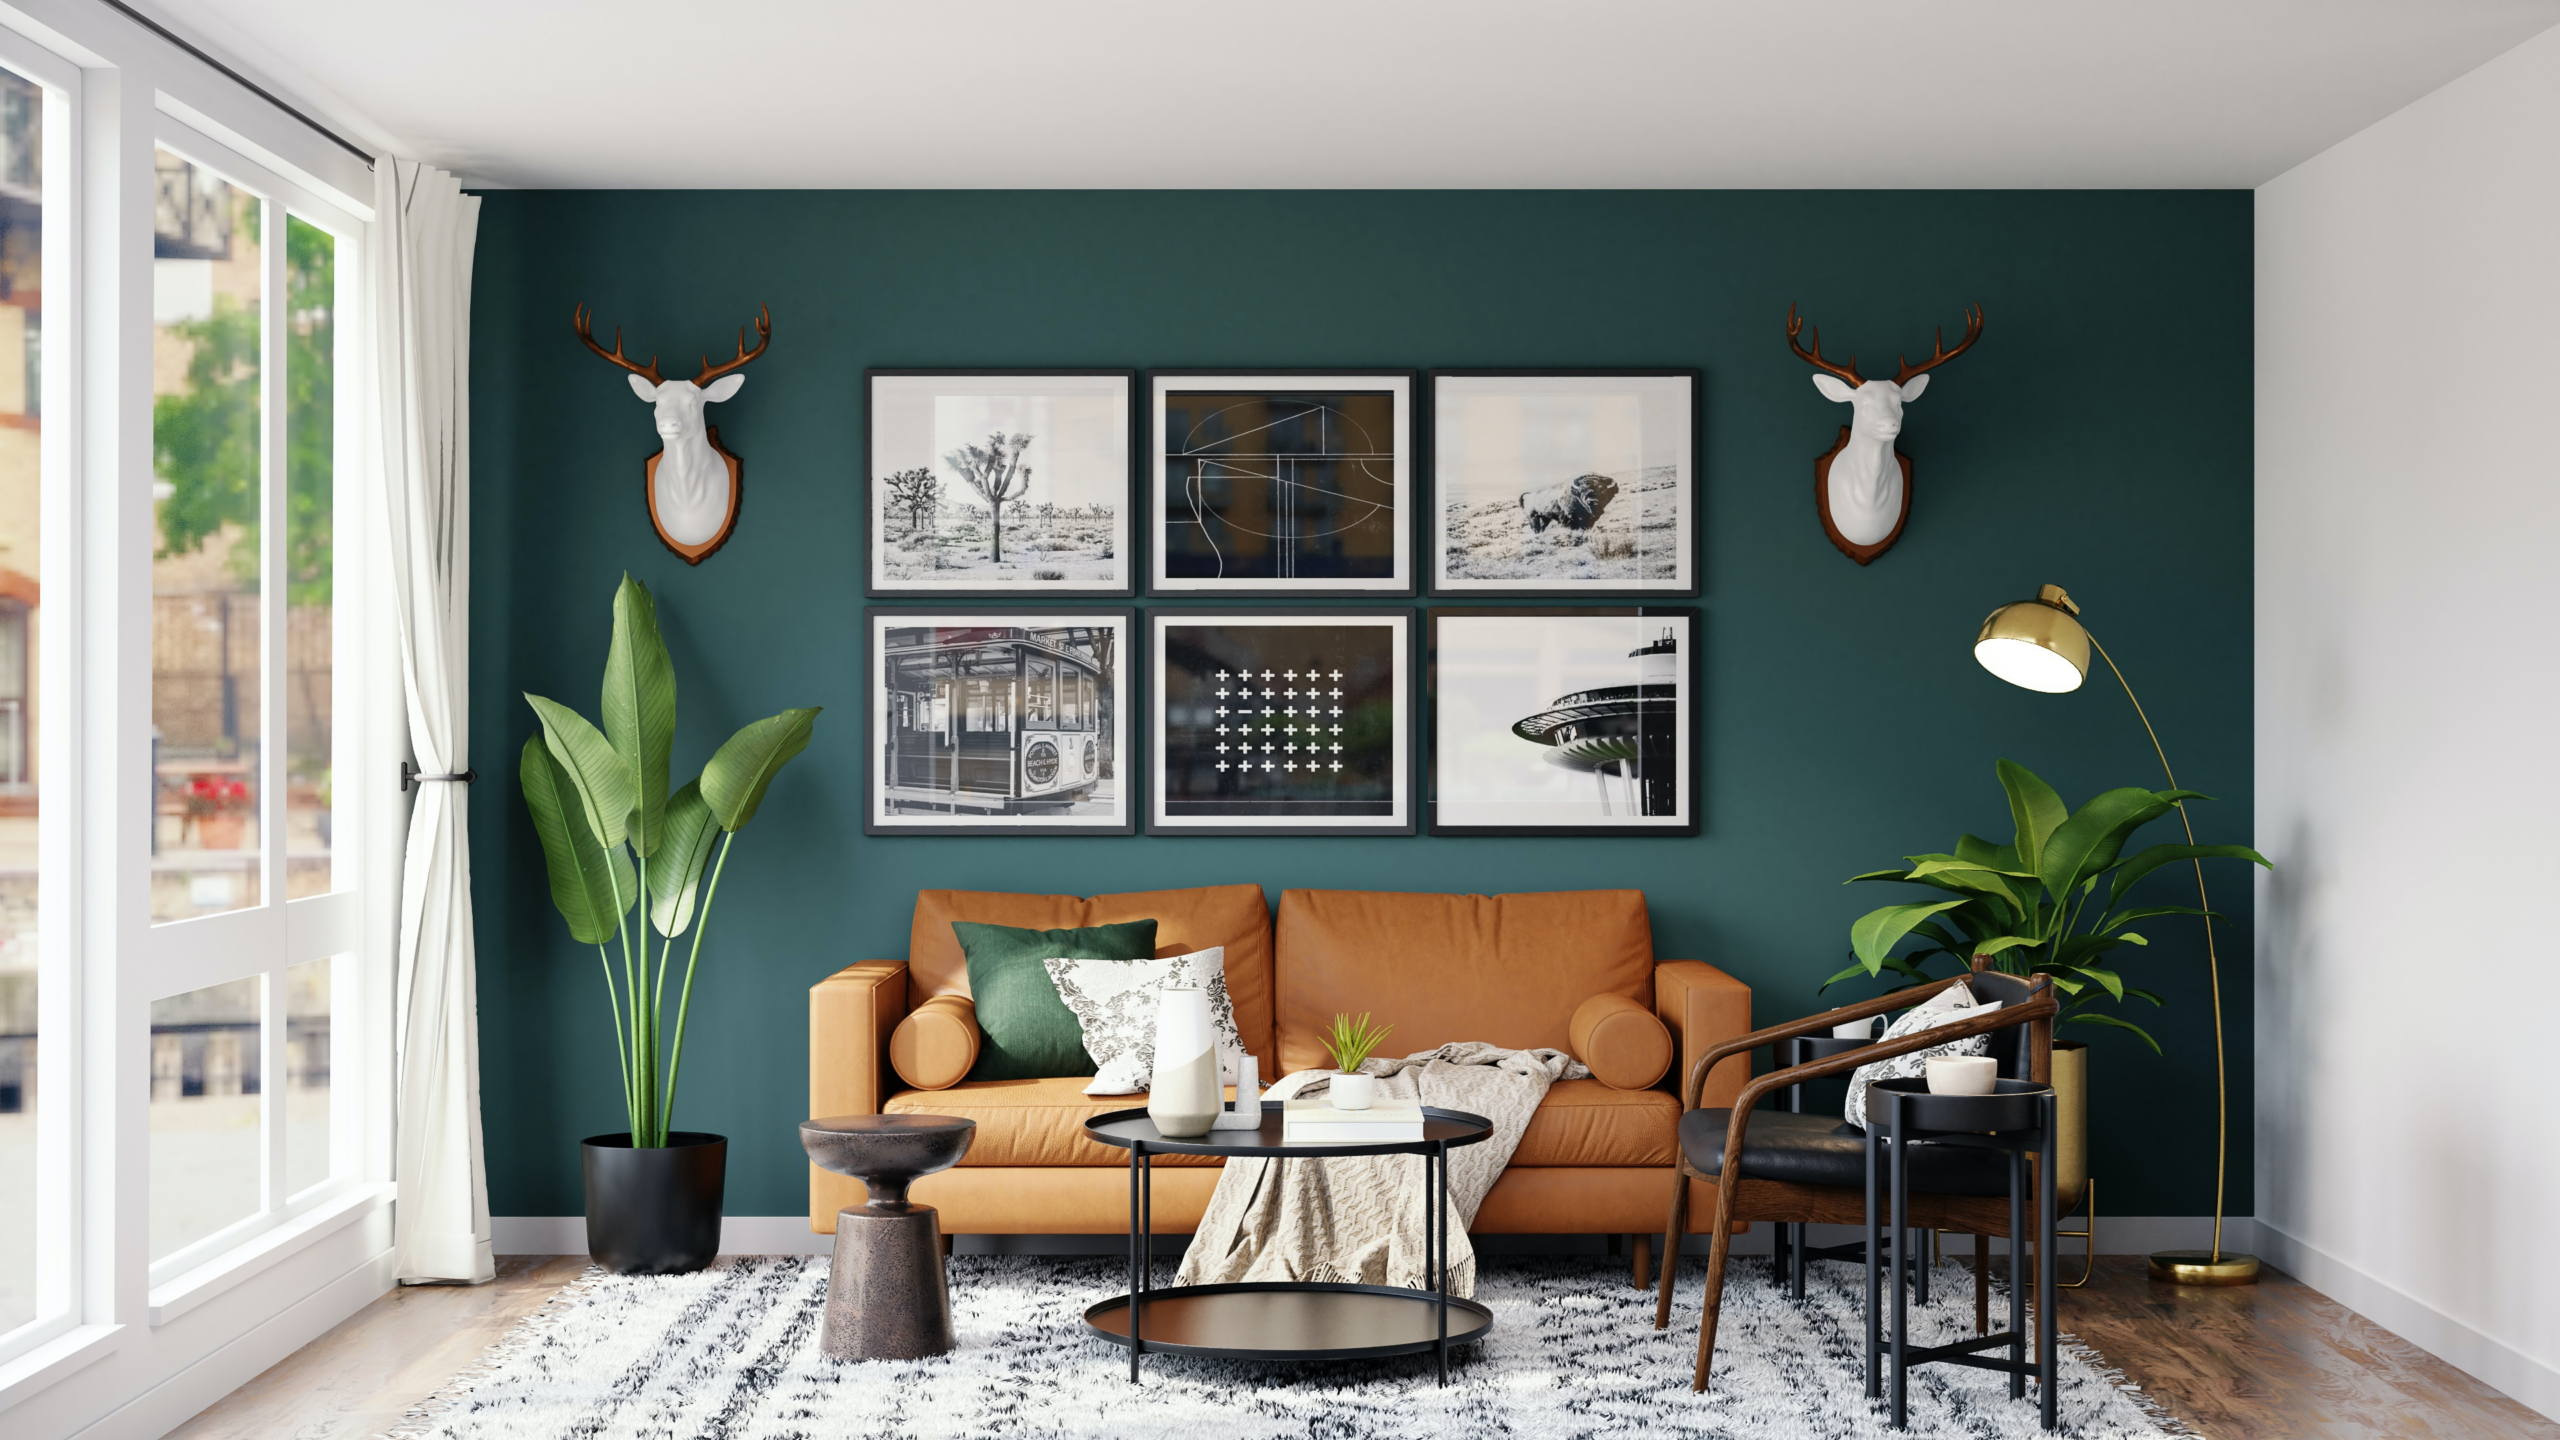 vacation rental decorating ideas in a living room decorated with wall art, brown leather couch, accent chair, ccoffee table, standing light, faux plants, and a cozy blanket that makes it feel like hom